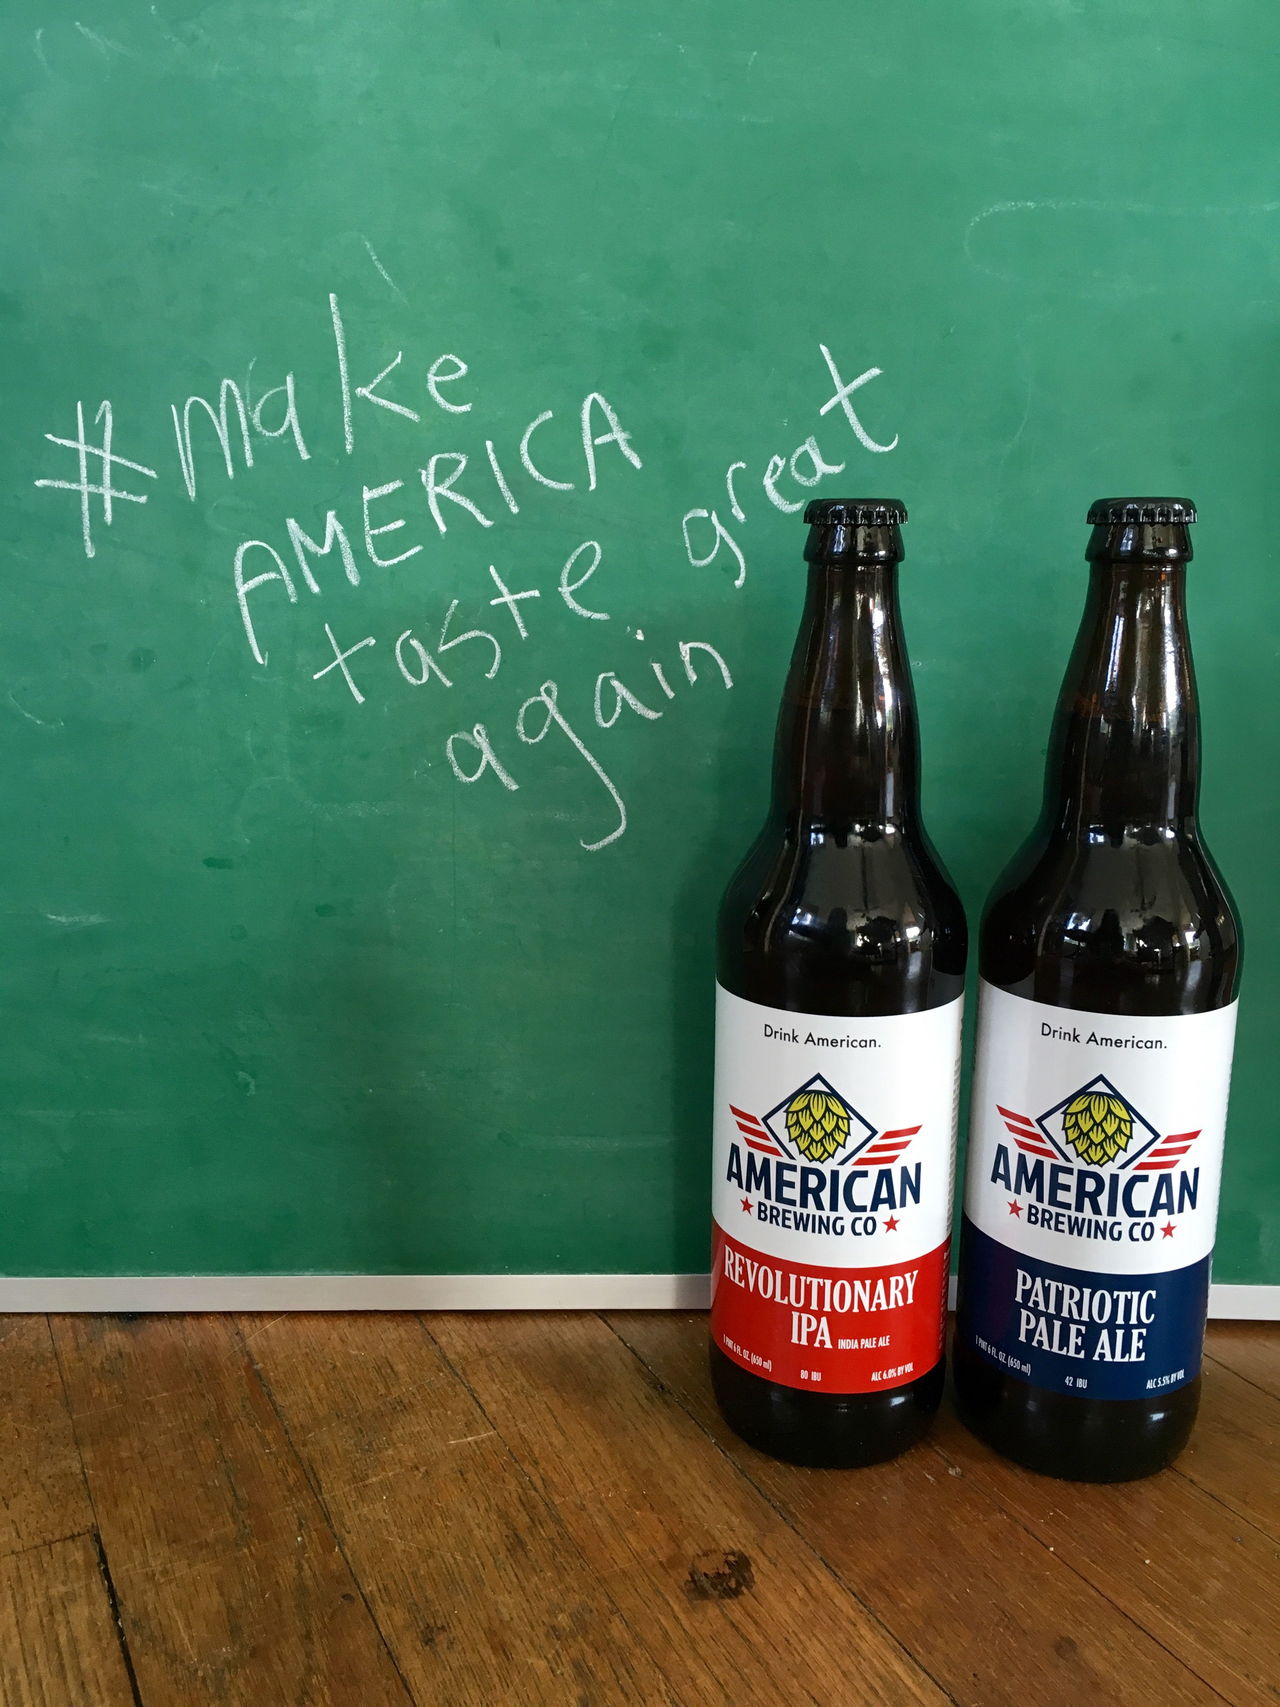 American Brewing Co. has released two new beers, the Revolutionary IPA and the Patriotic Pale Ale.